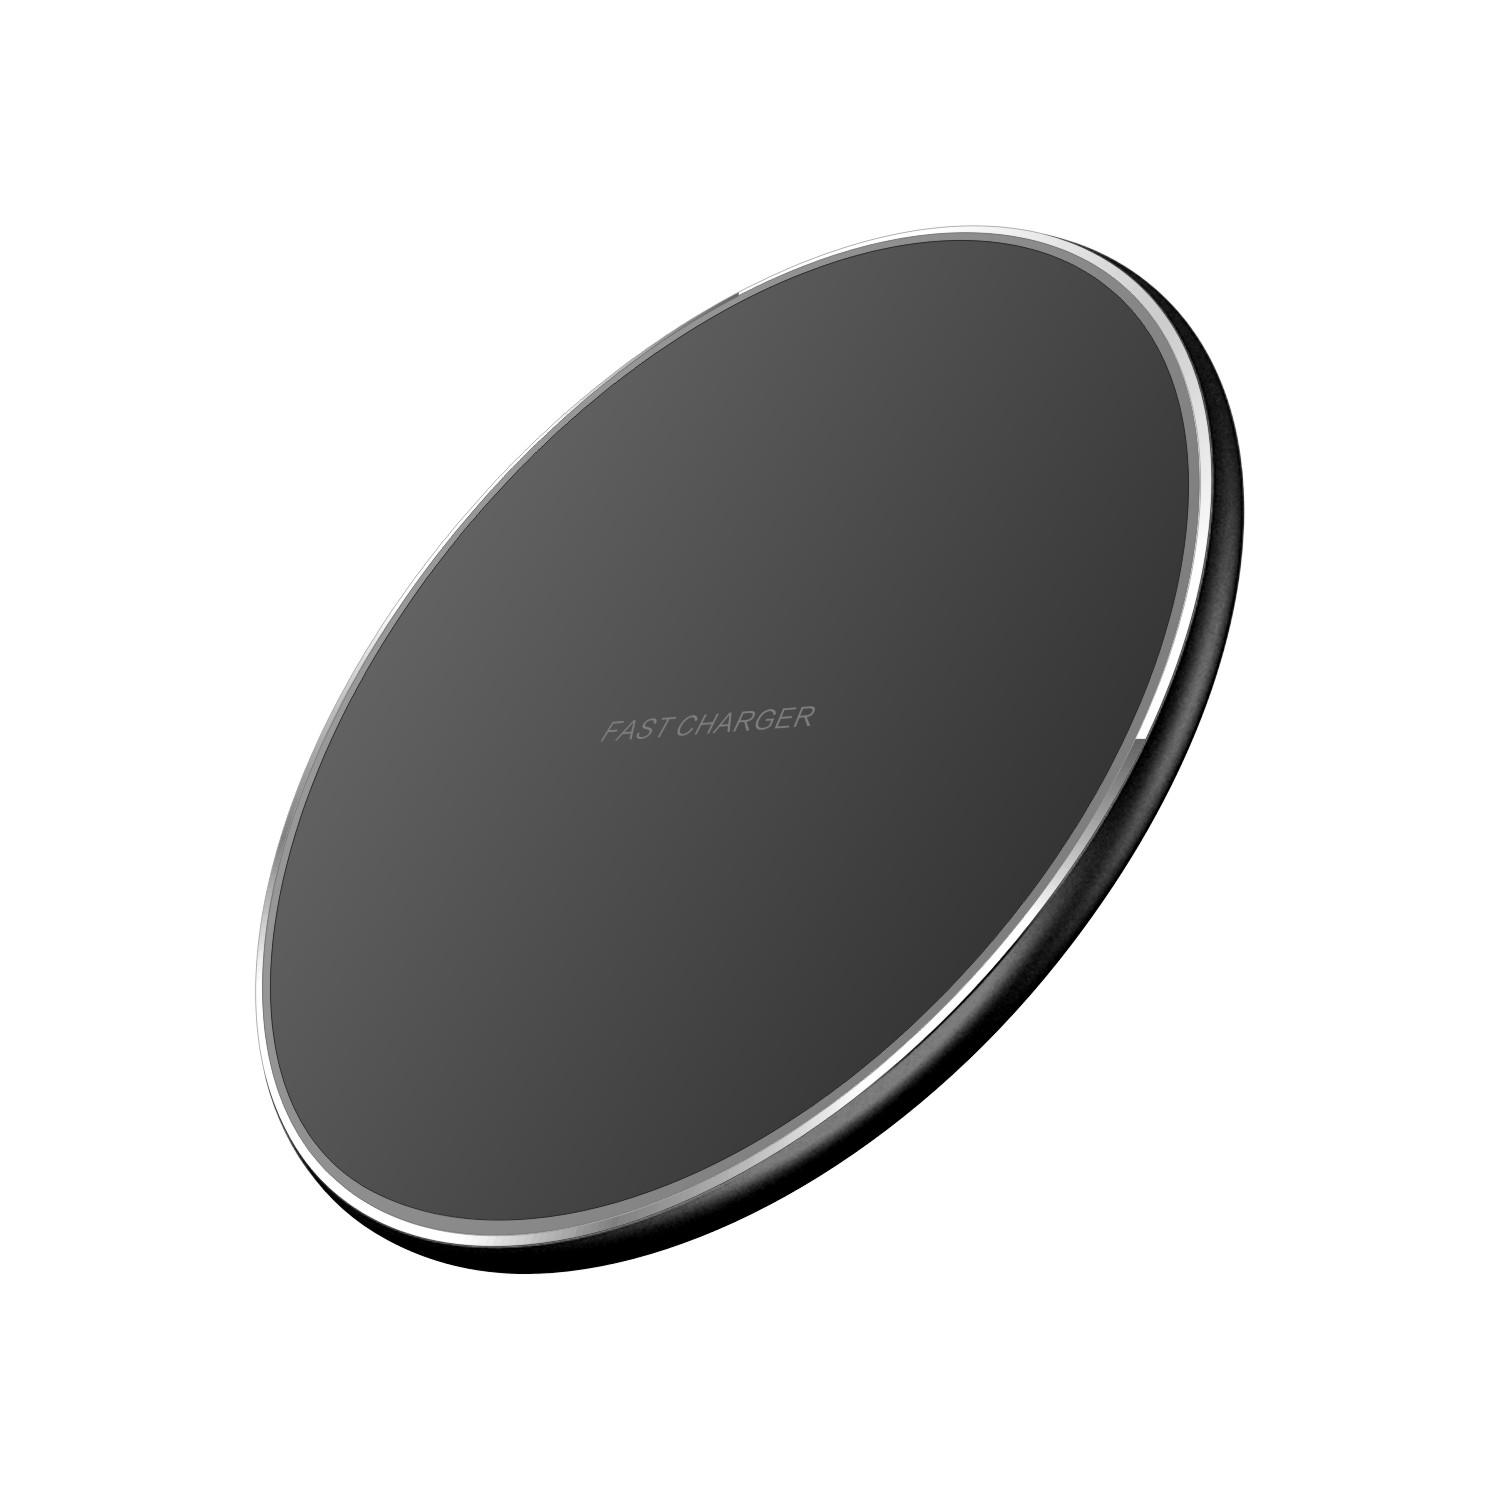  Fast-Charging wireless charger